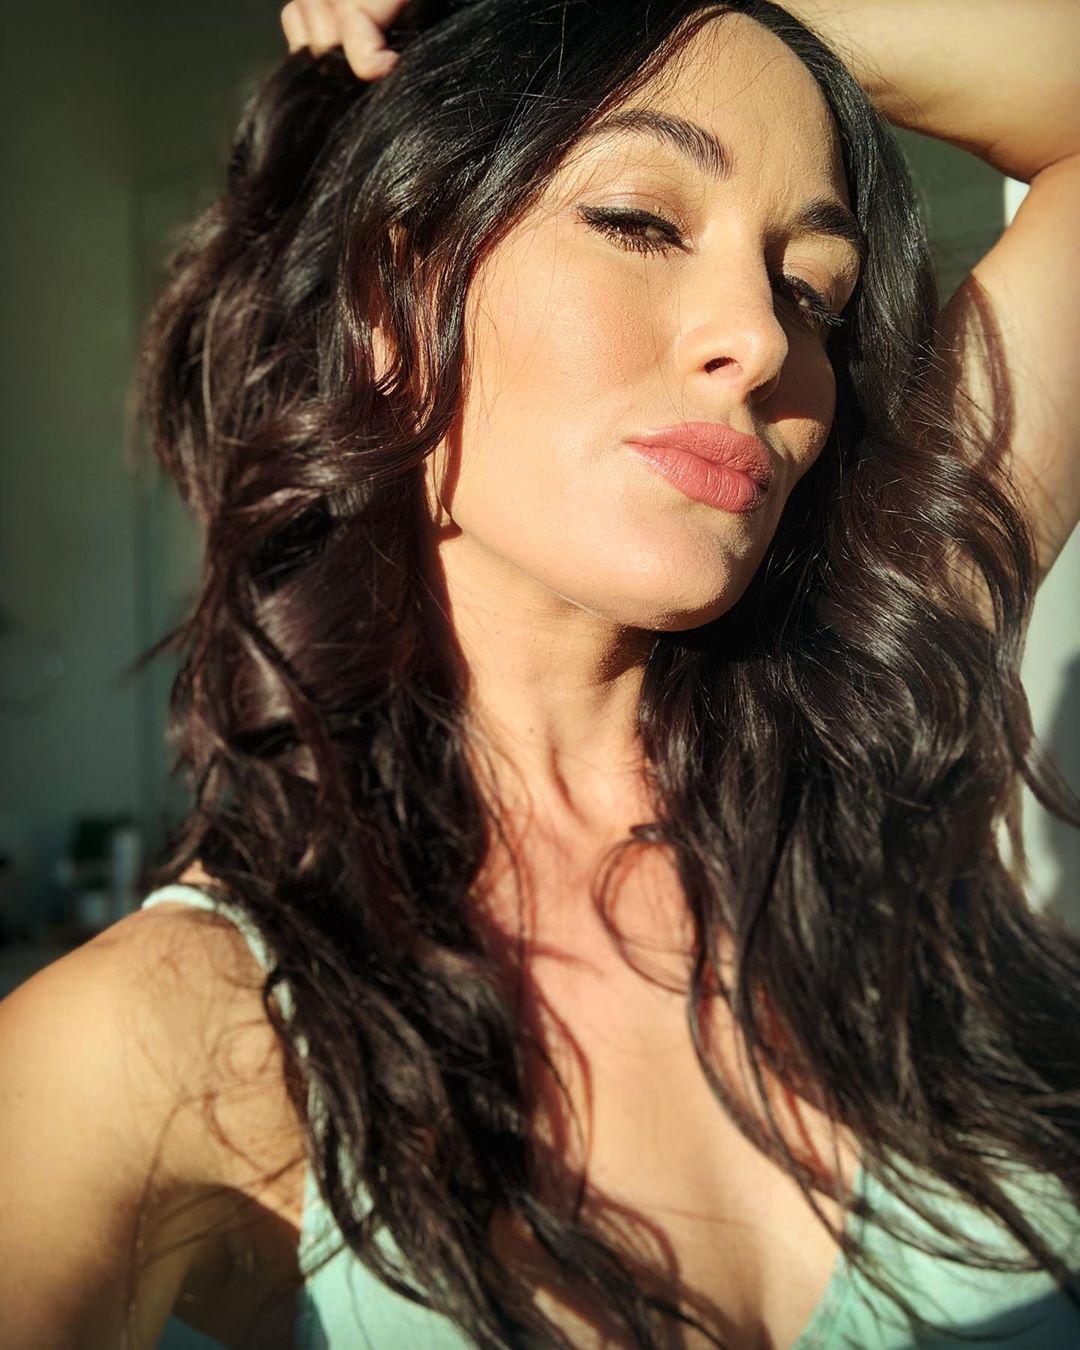 60+ Hot Pictures of Brie Bella Will Drive You Nuts For Her 190